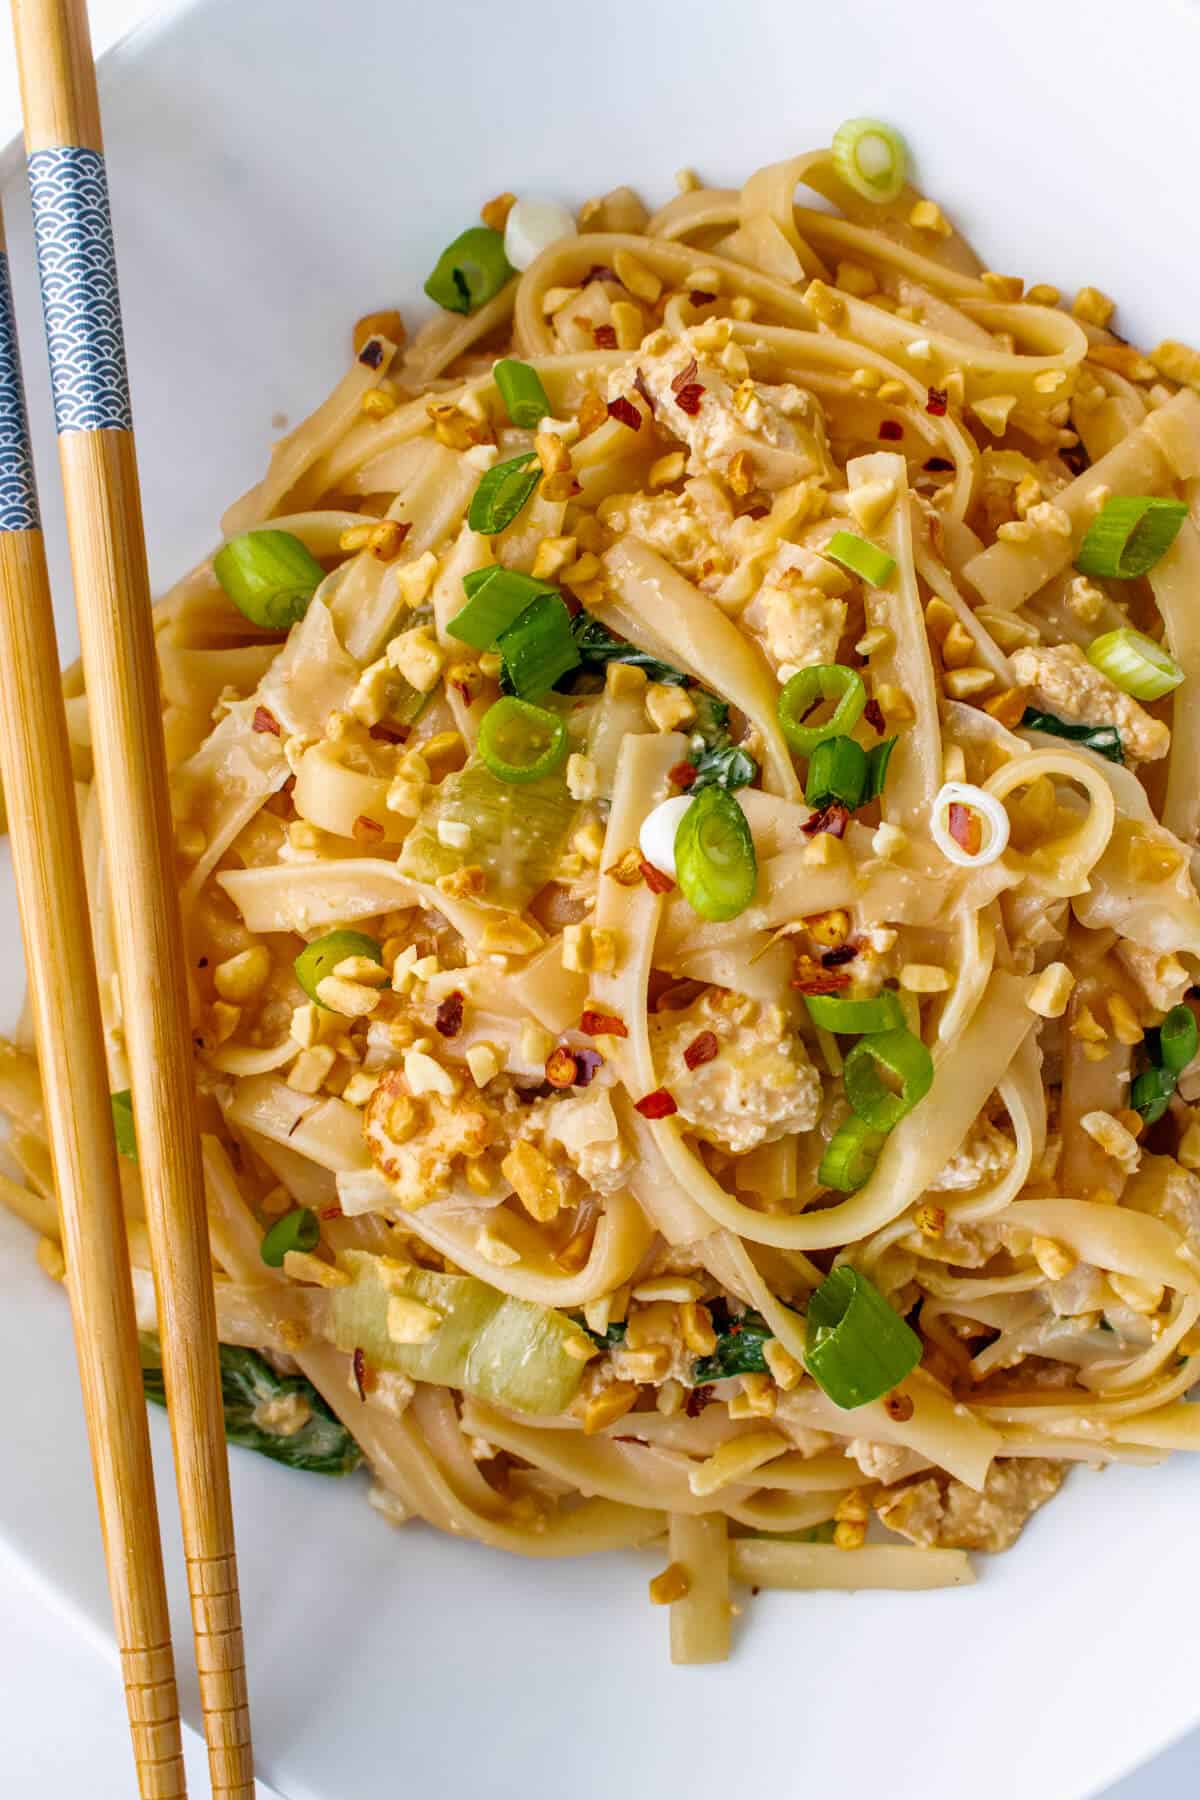 Peanut noodles in a bowl with chop sticks